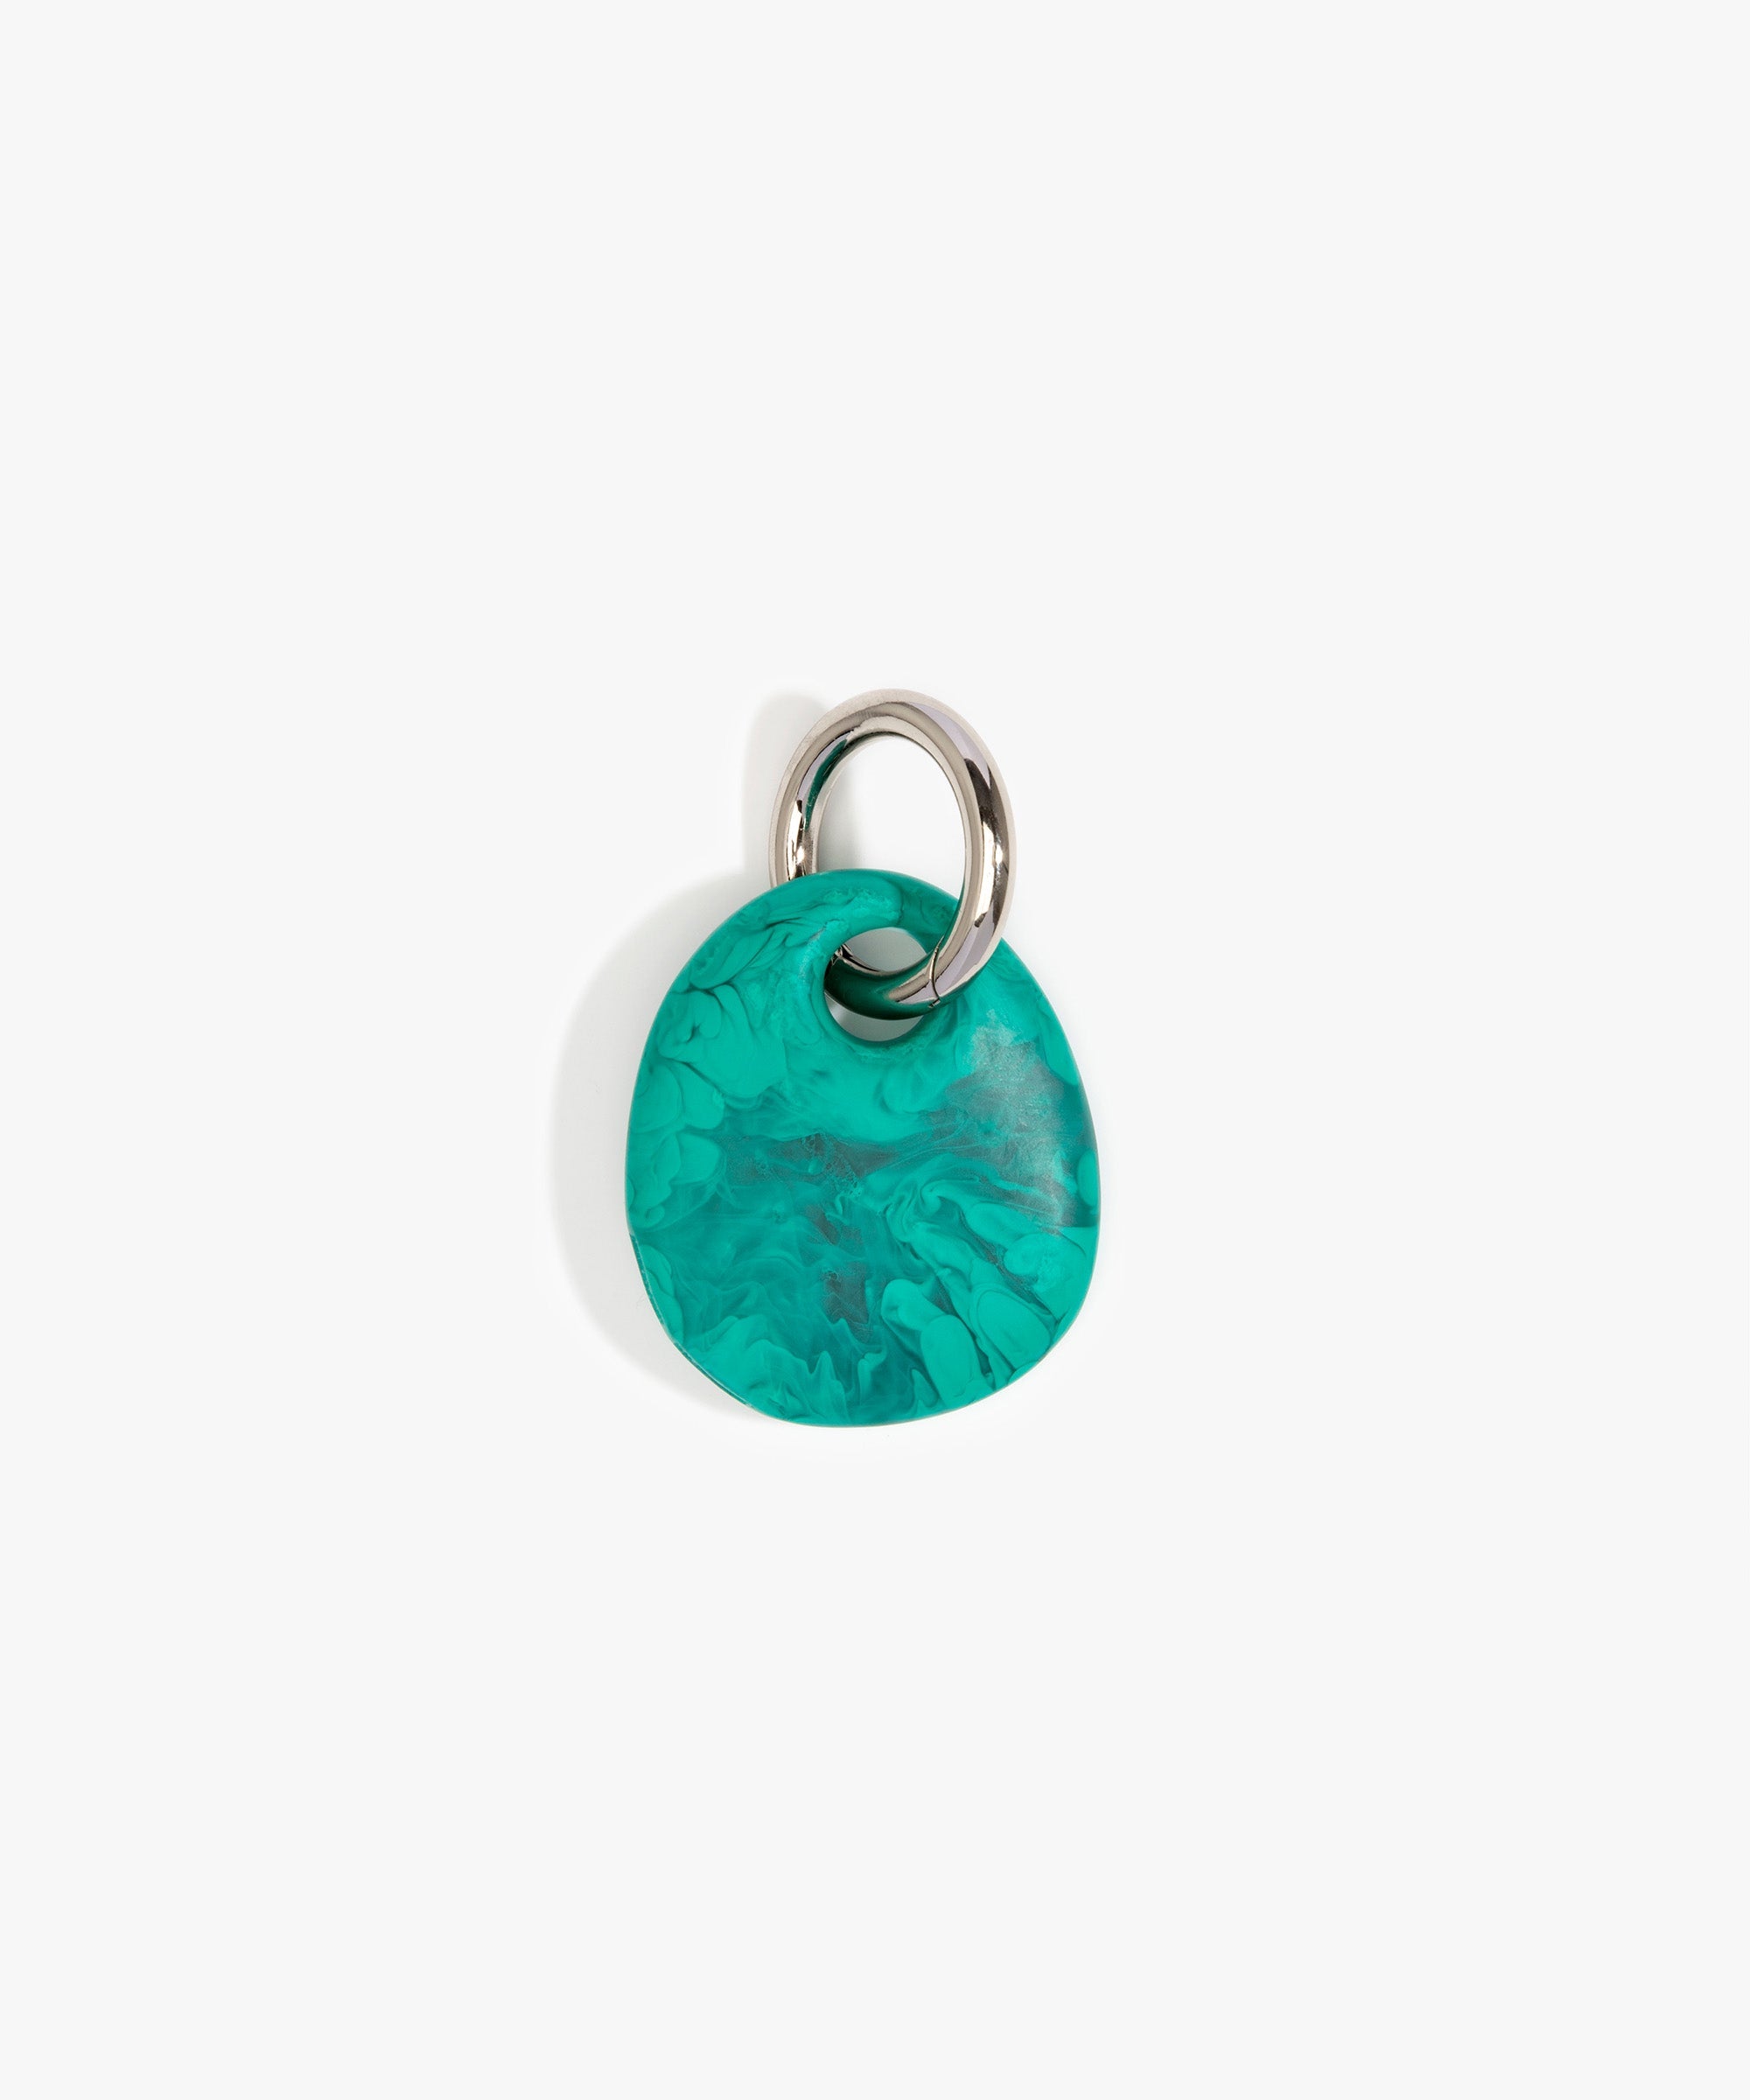 Dinosaur Designs Earth Keyring Keychains in Mineral Swirl color resin with Gunmetal Metal